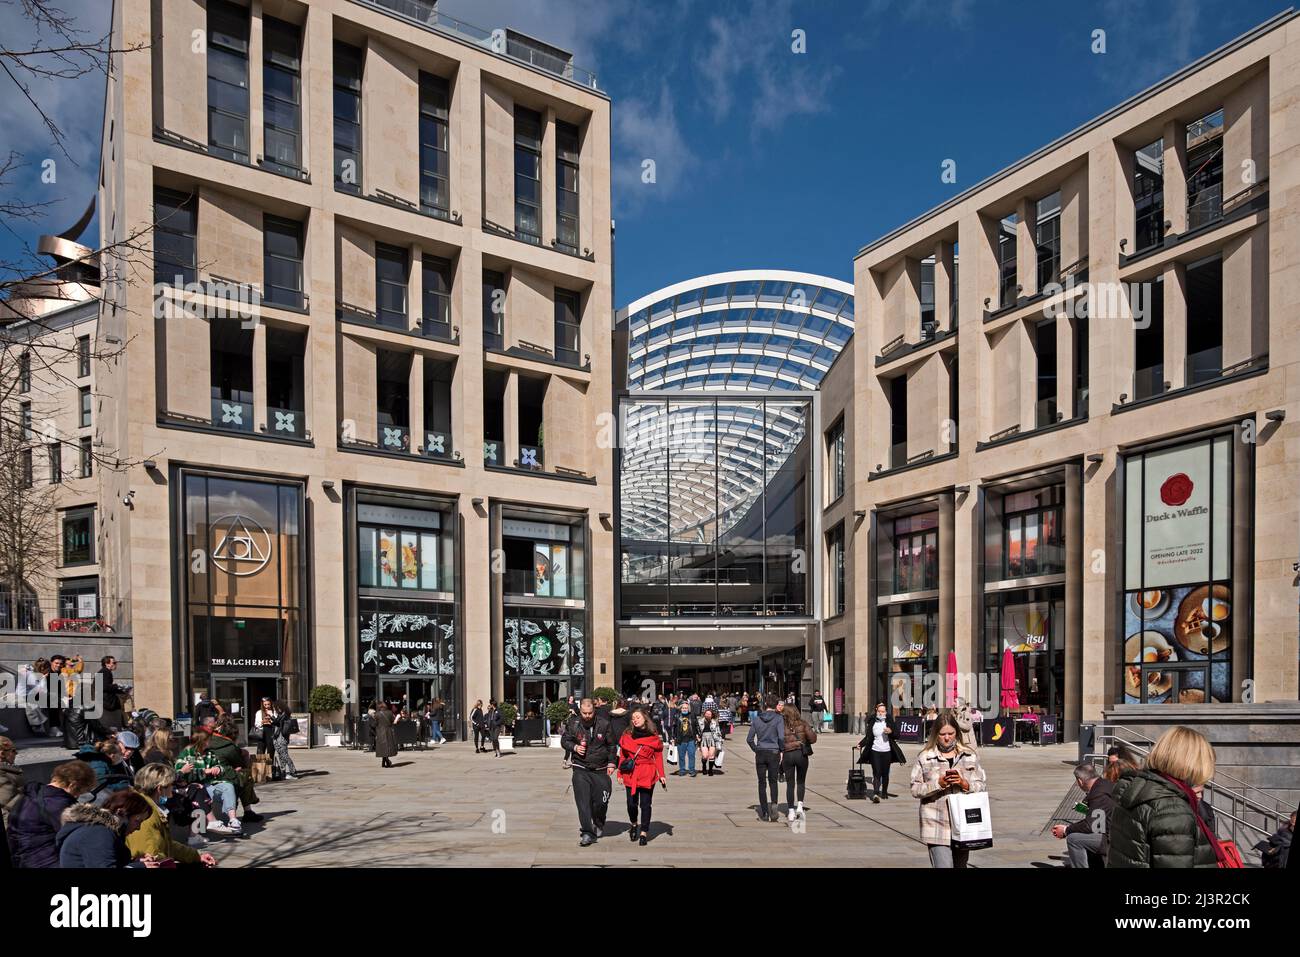 St James Quarter, a commercial and residential centre opened in 2021, replacing the old St James Centre. Edinburgh, Scotland. Stock Photo